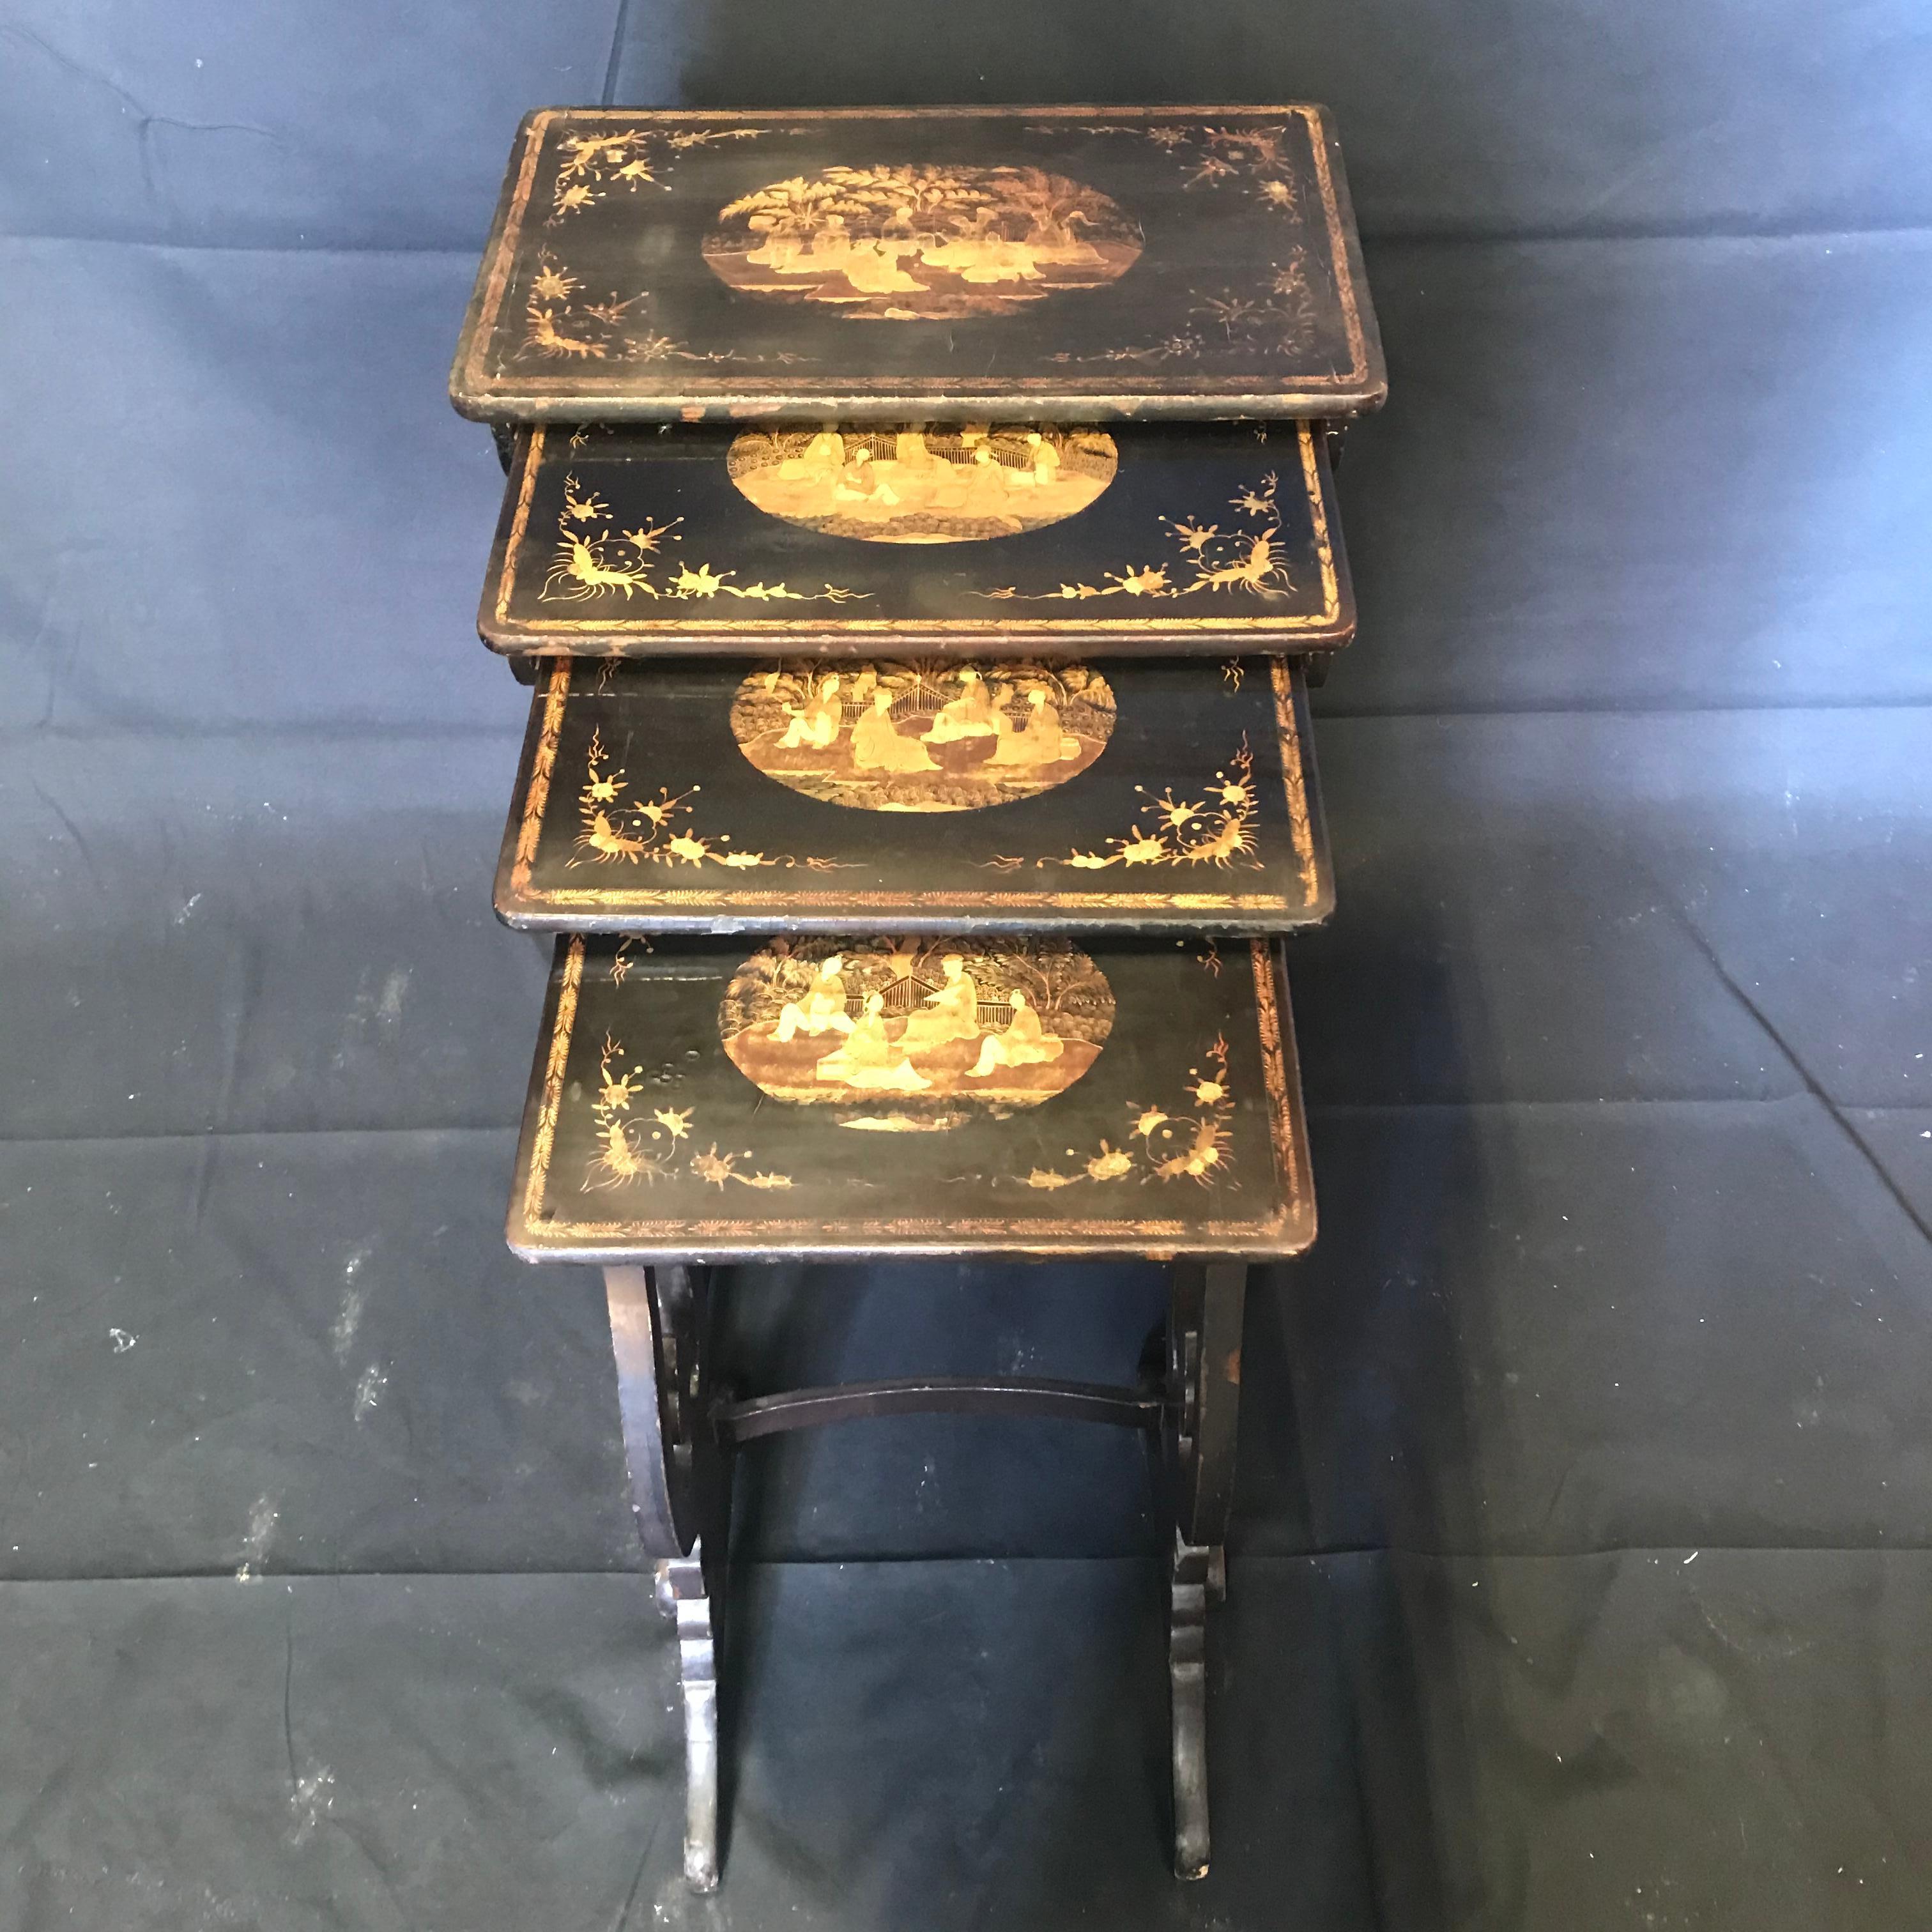 Set of four hand carved Asian style nesting tables featuring an hourglass form design and exquisitely hand painted figural scenes on each tabletop. Each table has a curved spreader and fits perfectly together. Unique chinoiserie design with a fleur